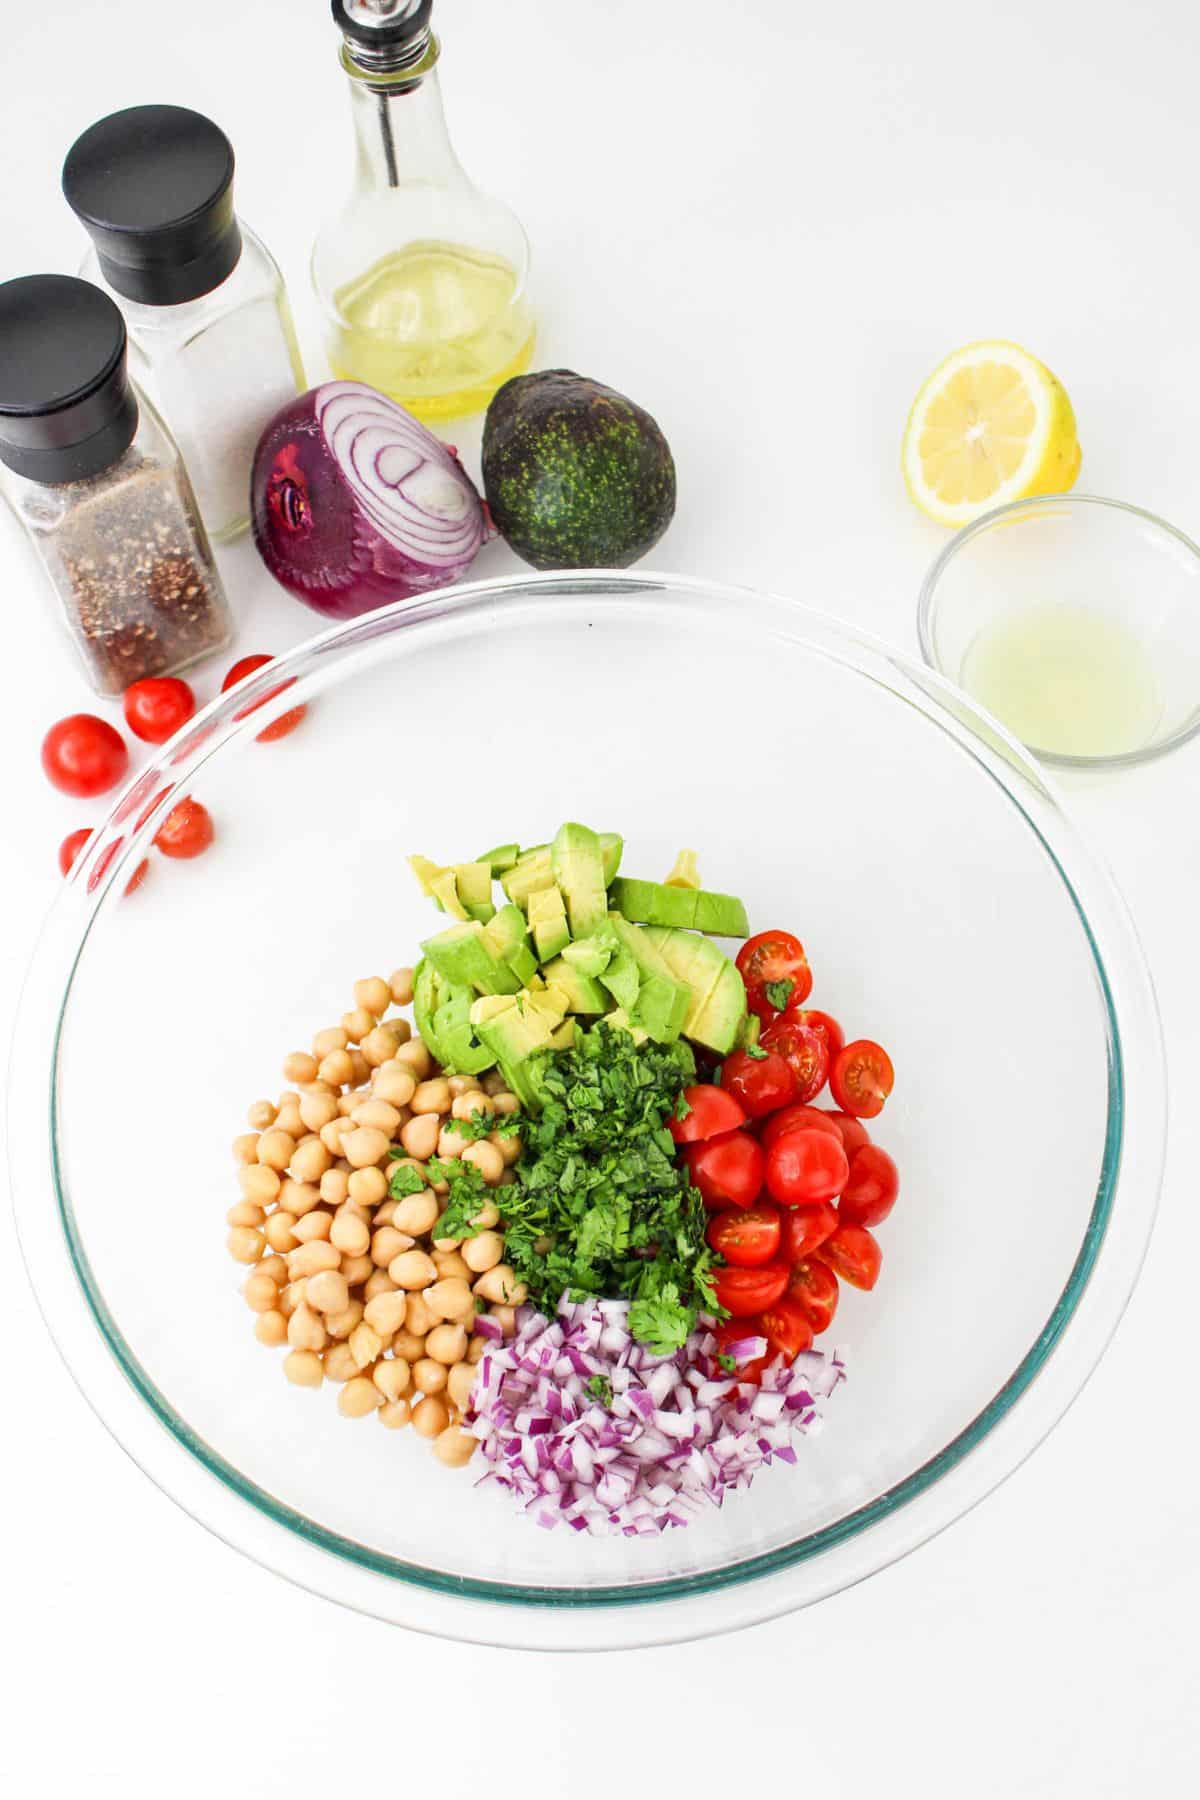 avocados, chickpeas, tomatoes, red onion, and cliantro in a glass bowl.